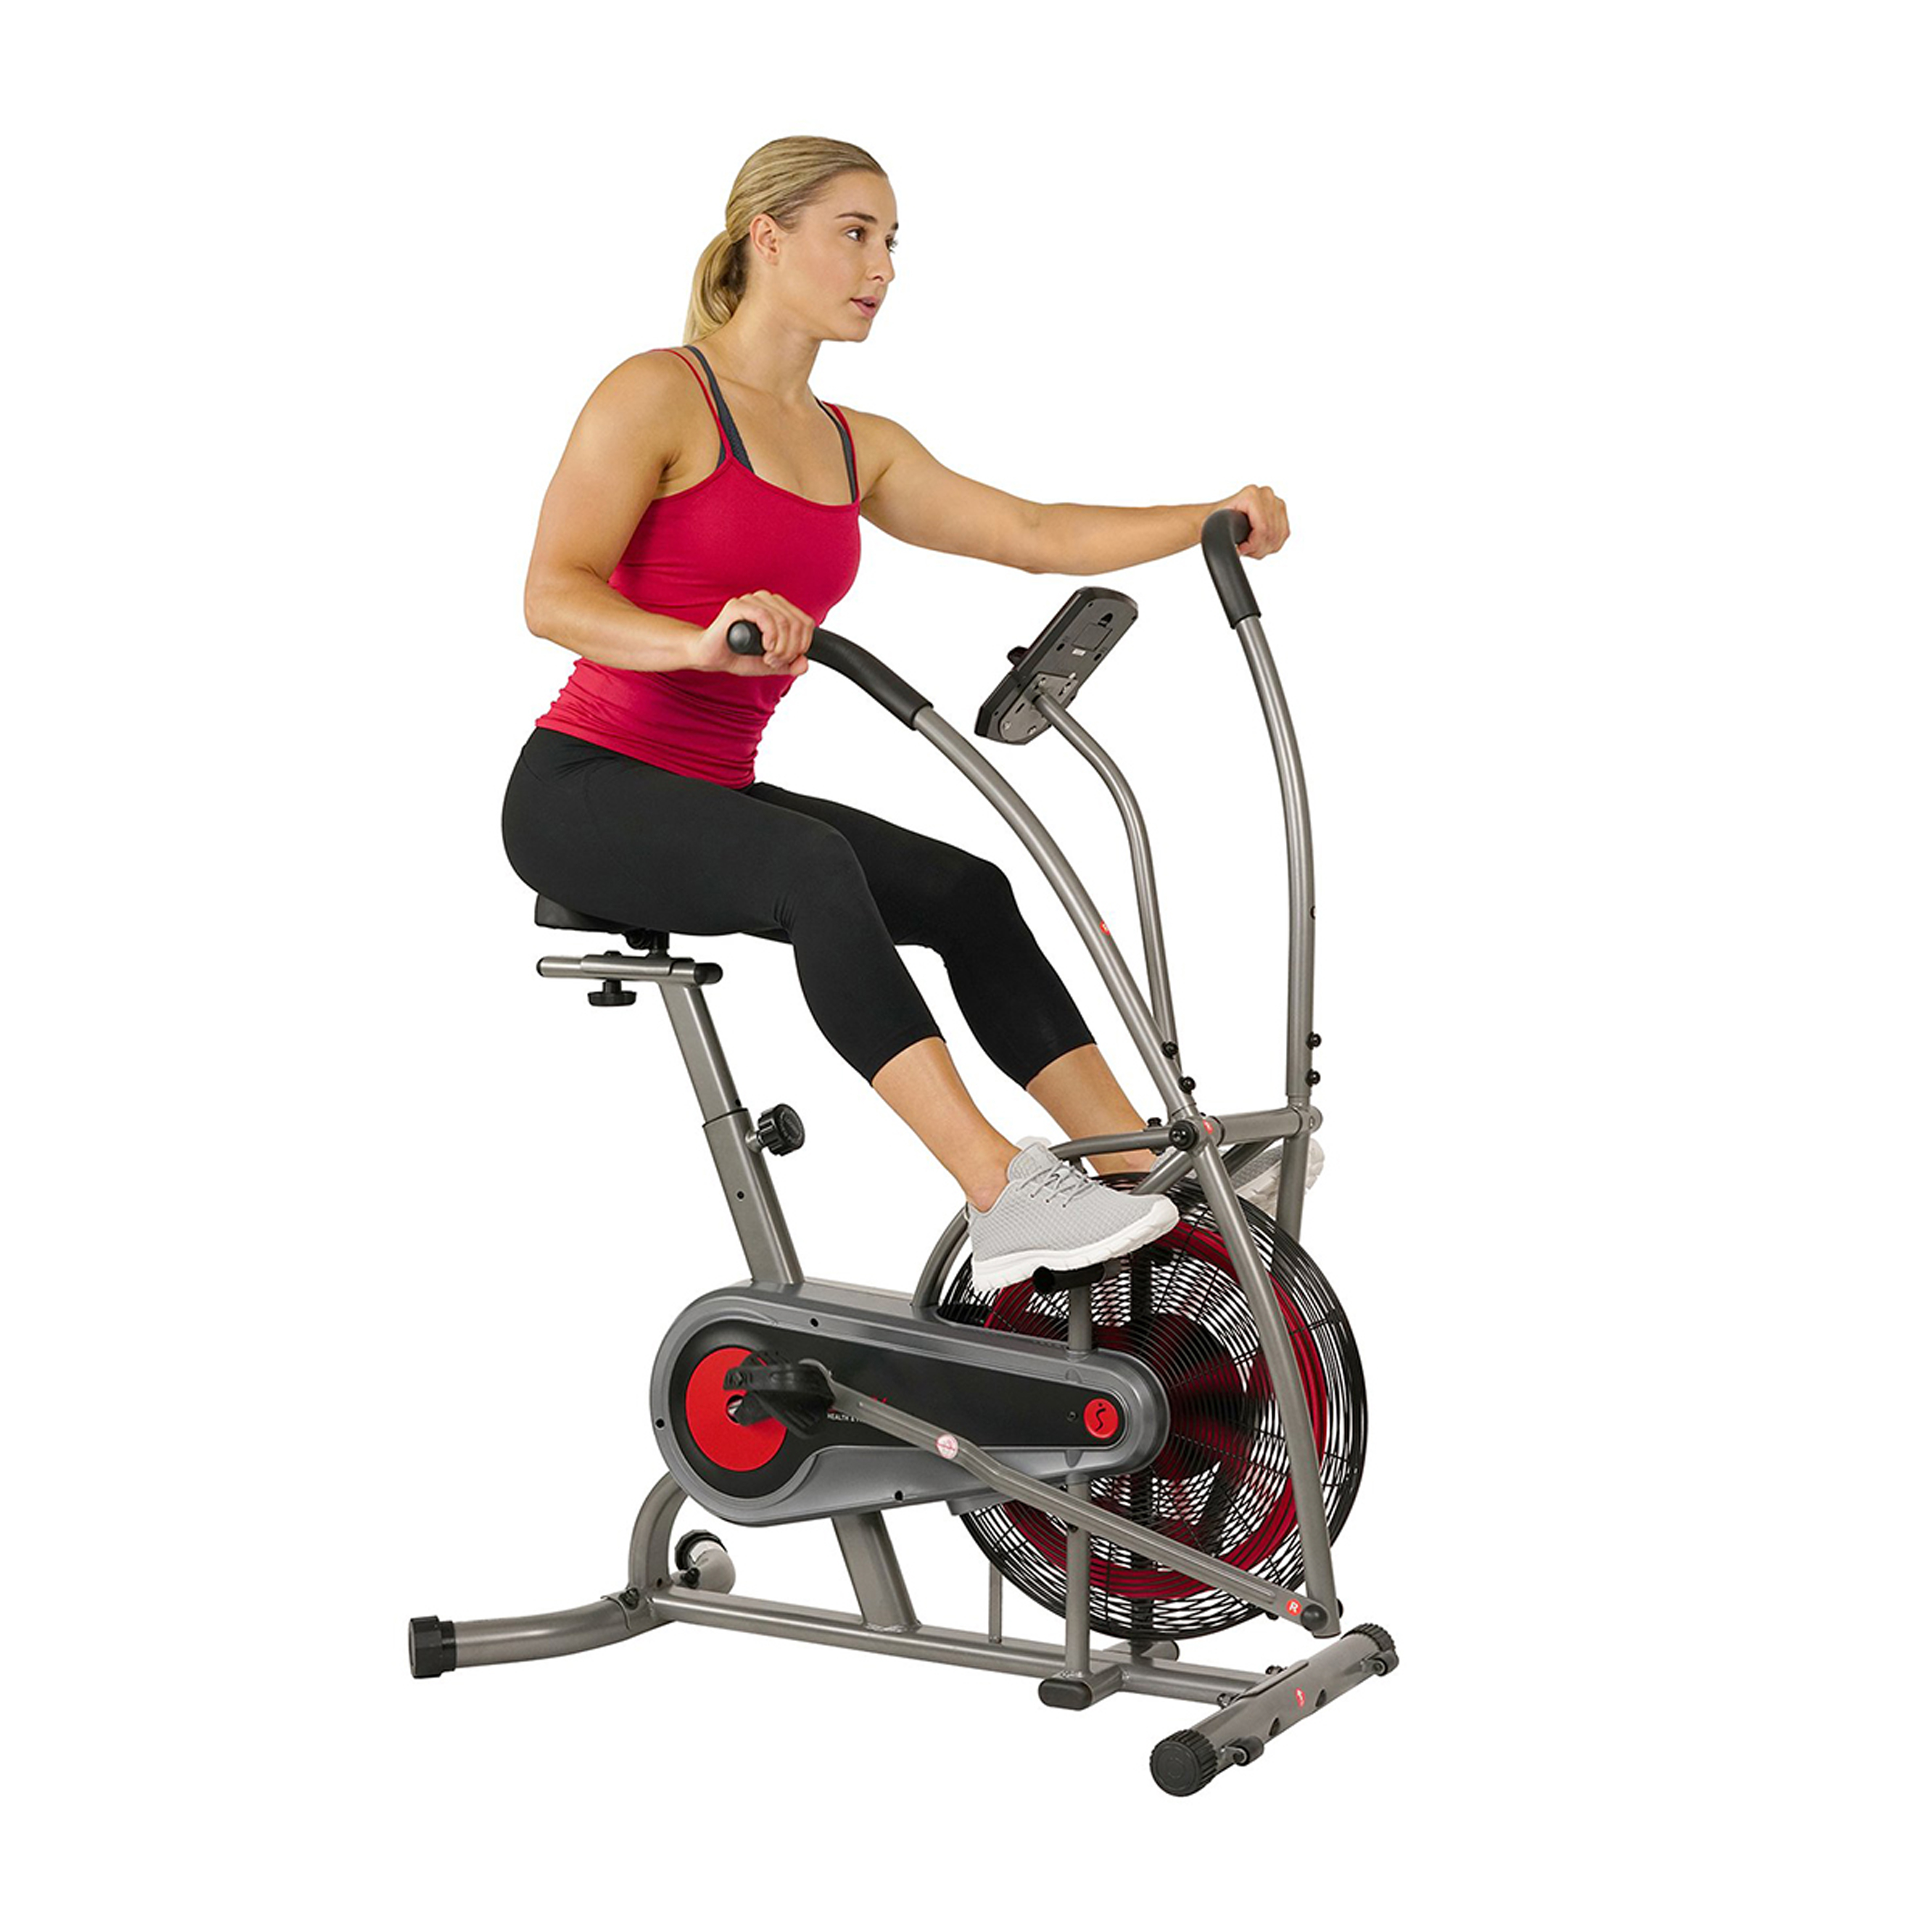 Sunny Health & Fitness Stationary Motion Fan Air Bike Exercise Machine, Indoor Home Cycling Trainer Static Bicycle, SF-B2916 - image 6 of 8